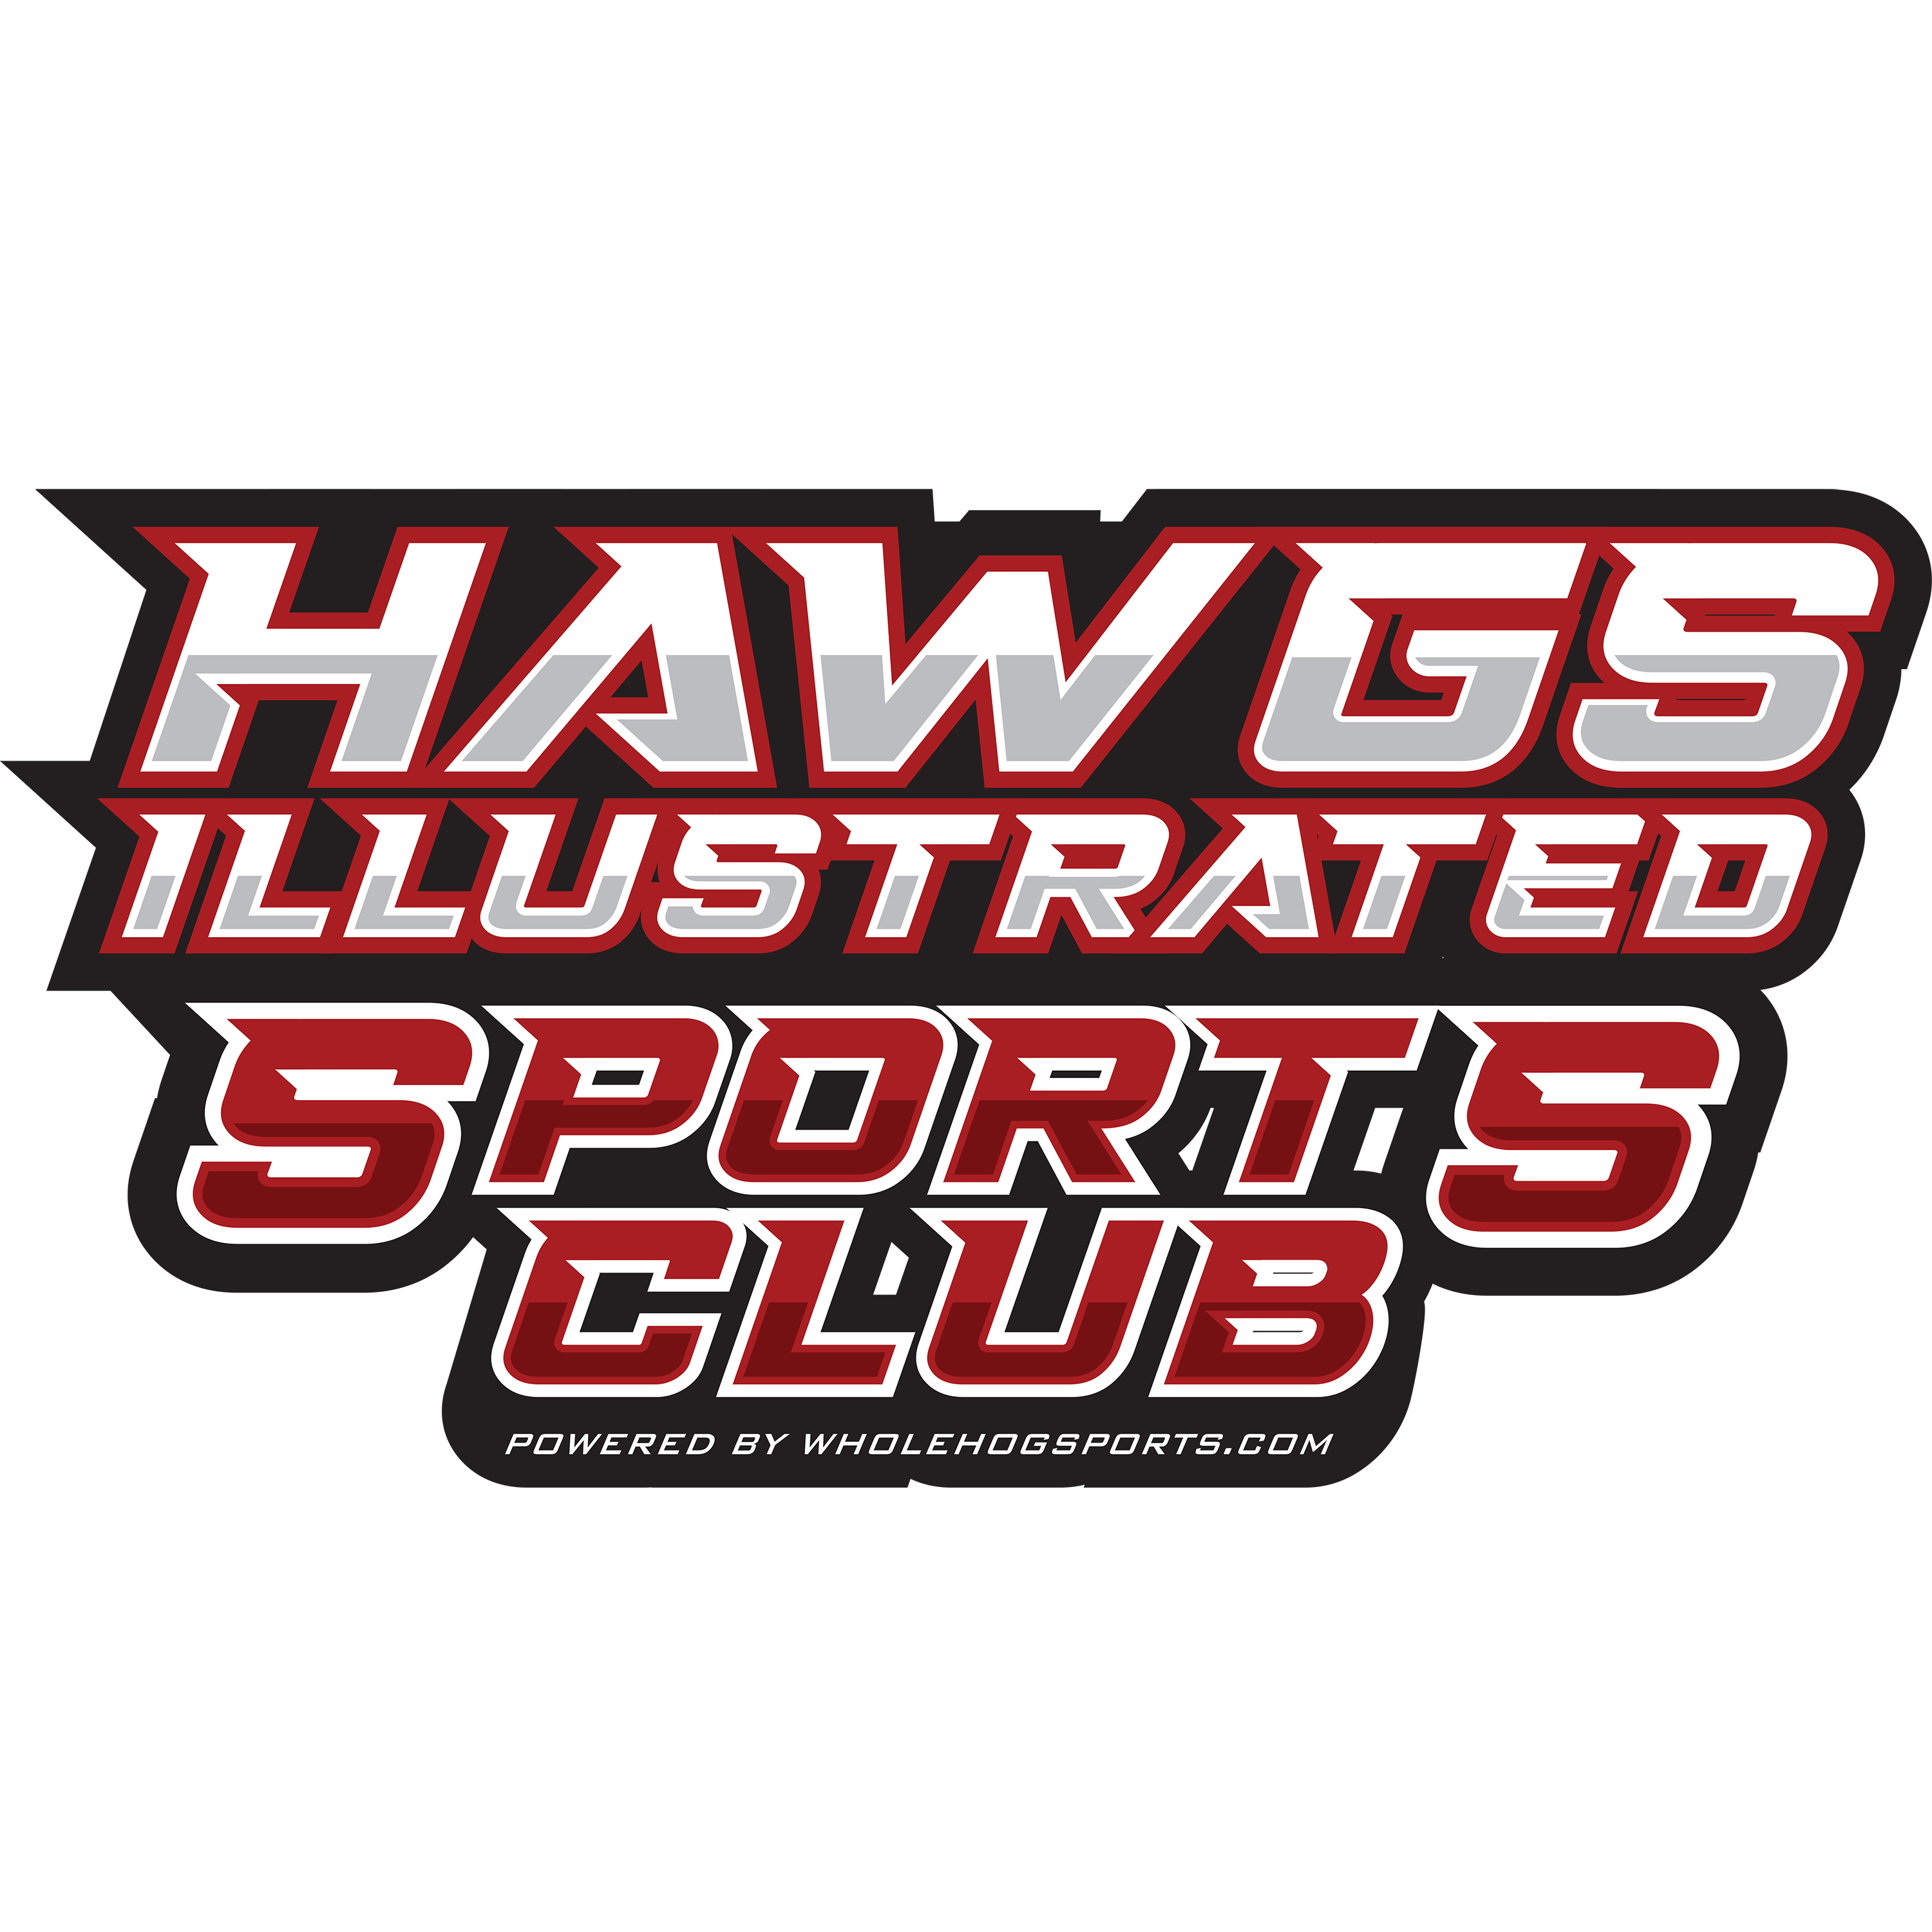 Hawgs Illustrated Sports Club Podcast: Guest speaker Kevin Trainor